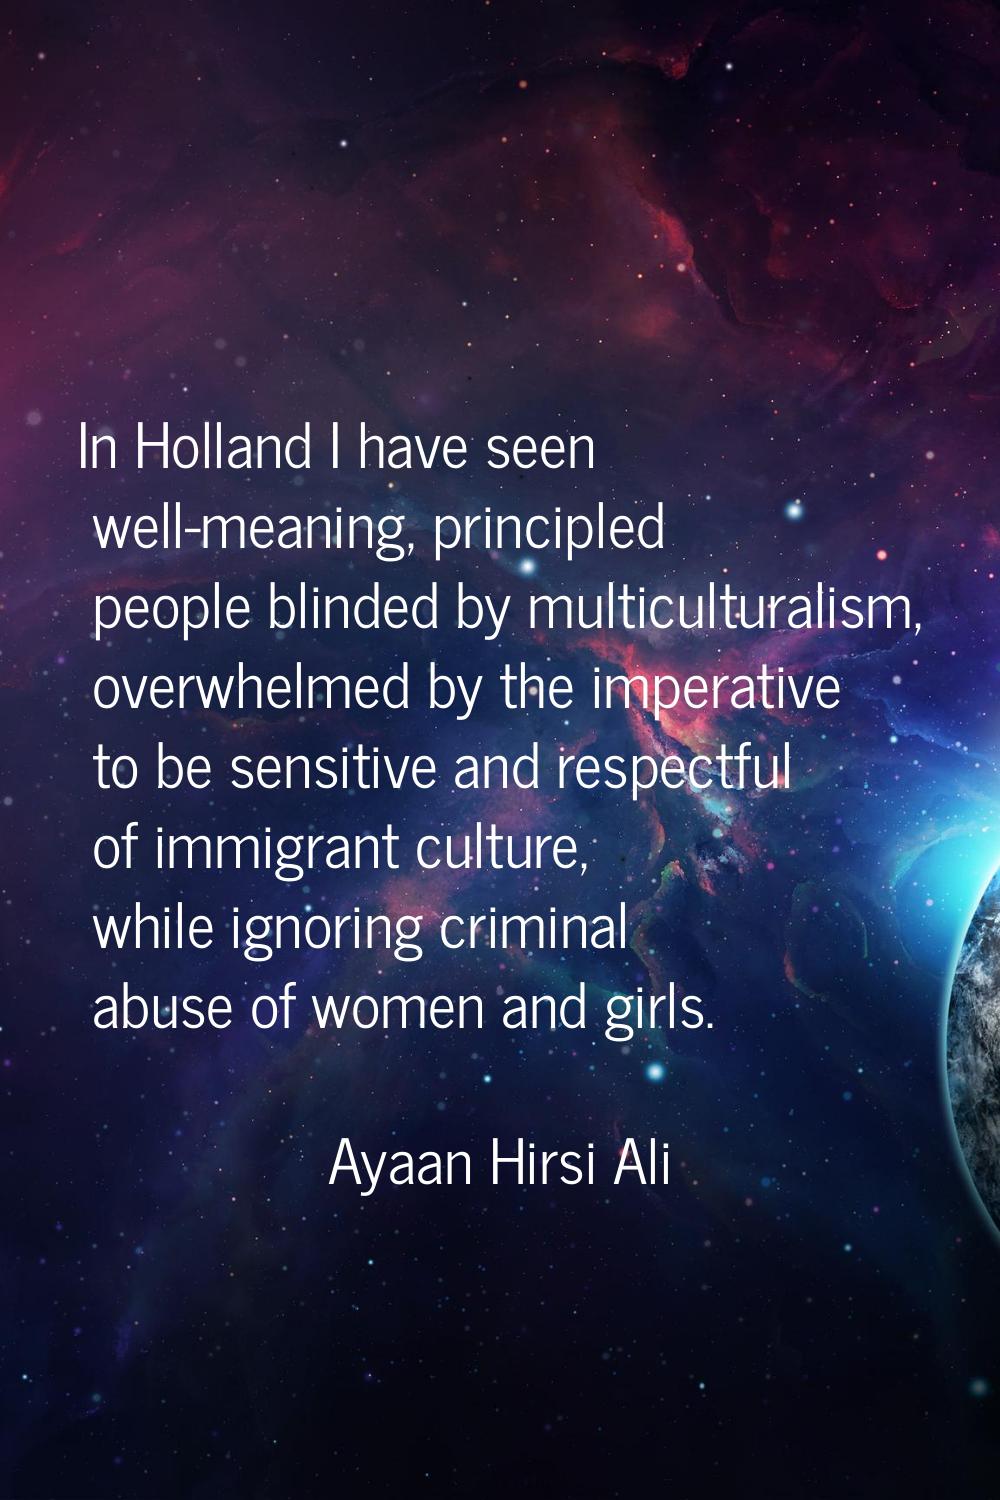 In Holland I have seen well-meaning, principled people blinded by multiculturalism, overwhelmed by 